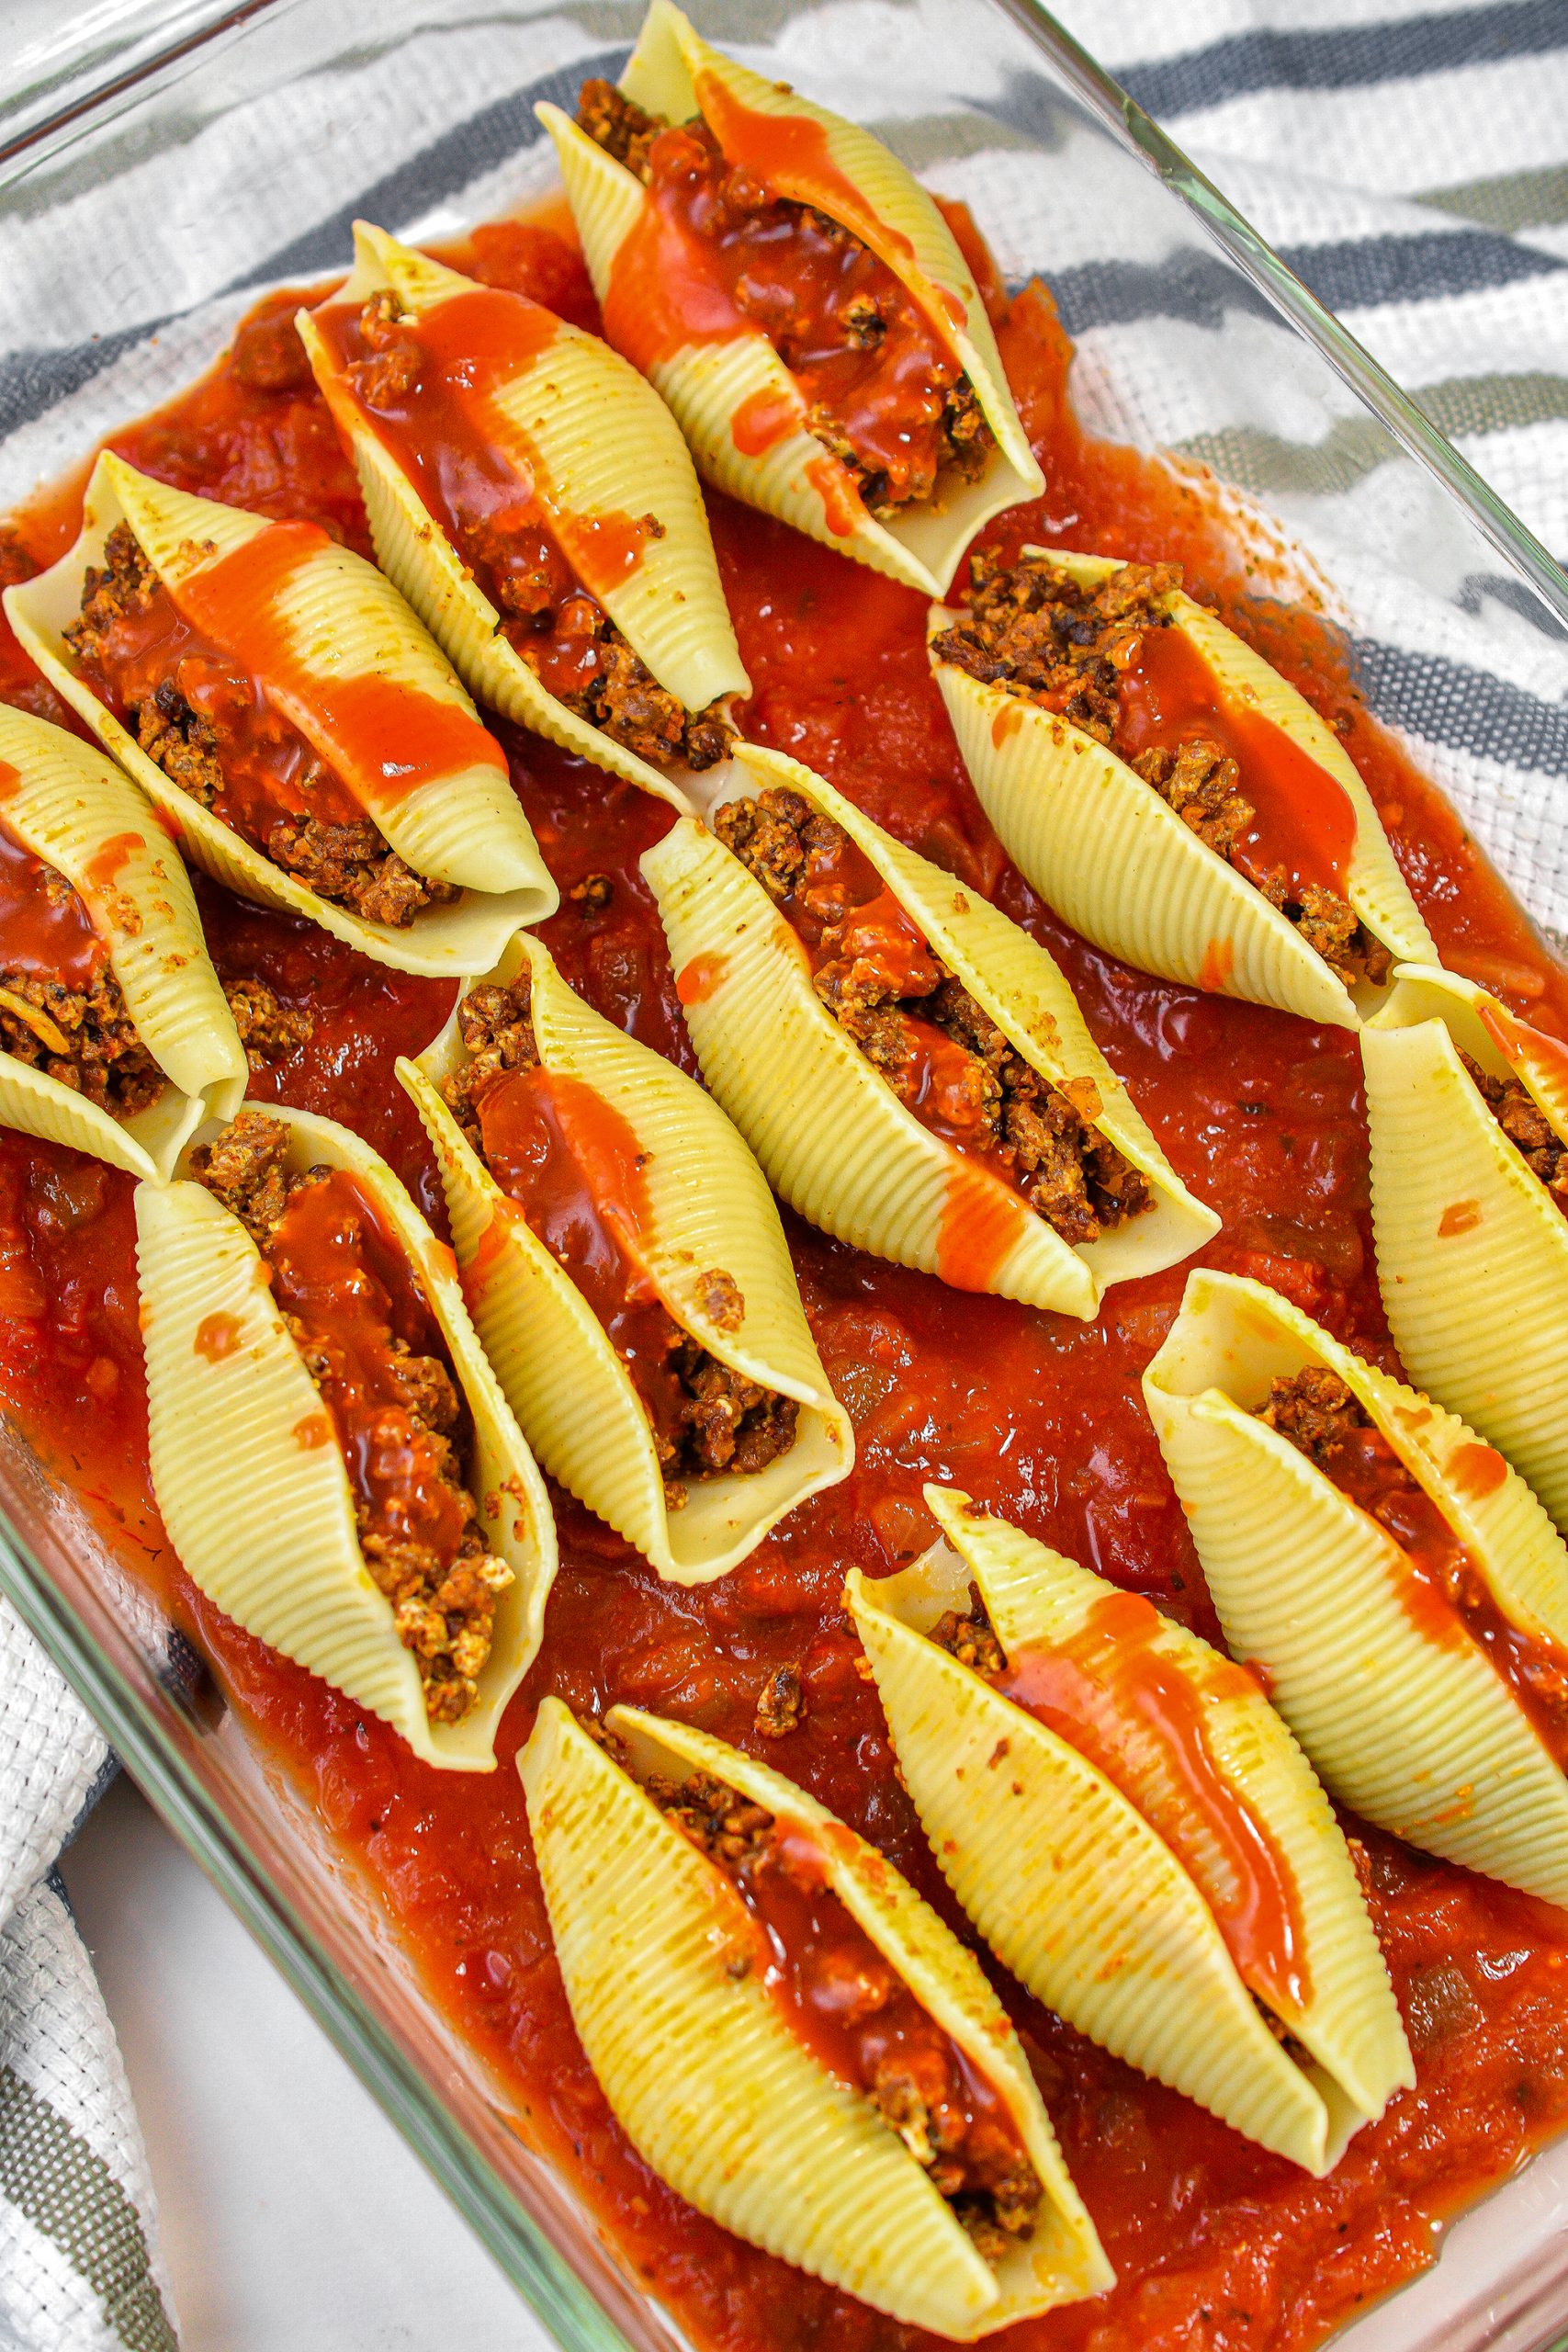 Pour the taco sauce over the shells.